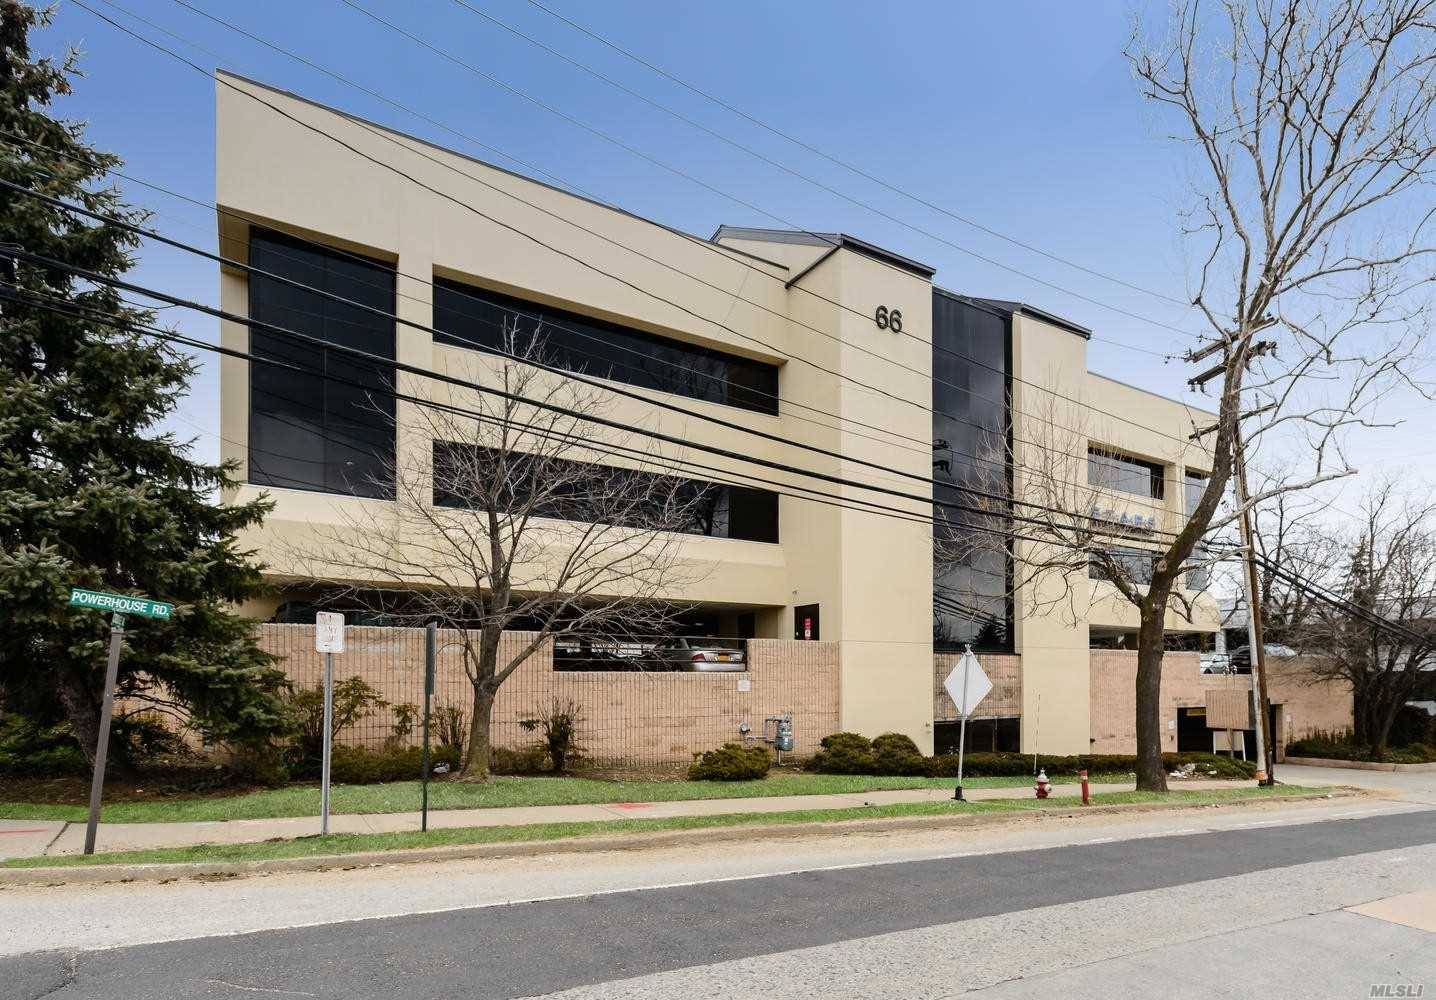 Completely Renovated Office Building, Fully Leased With A Noi Of $489,054.